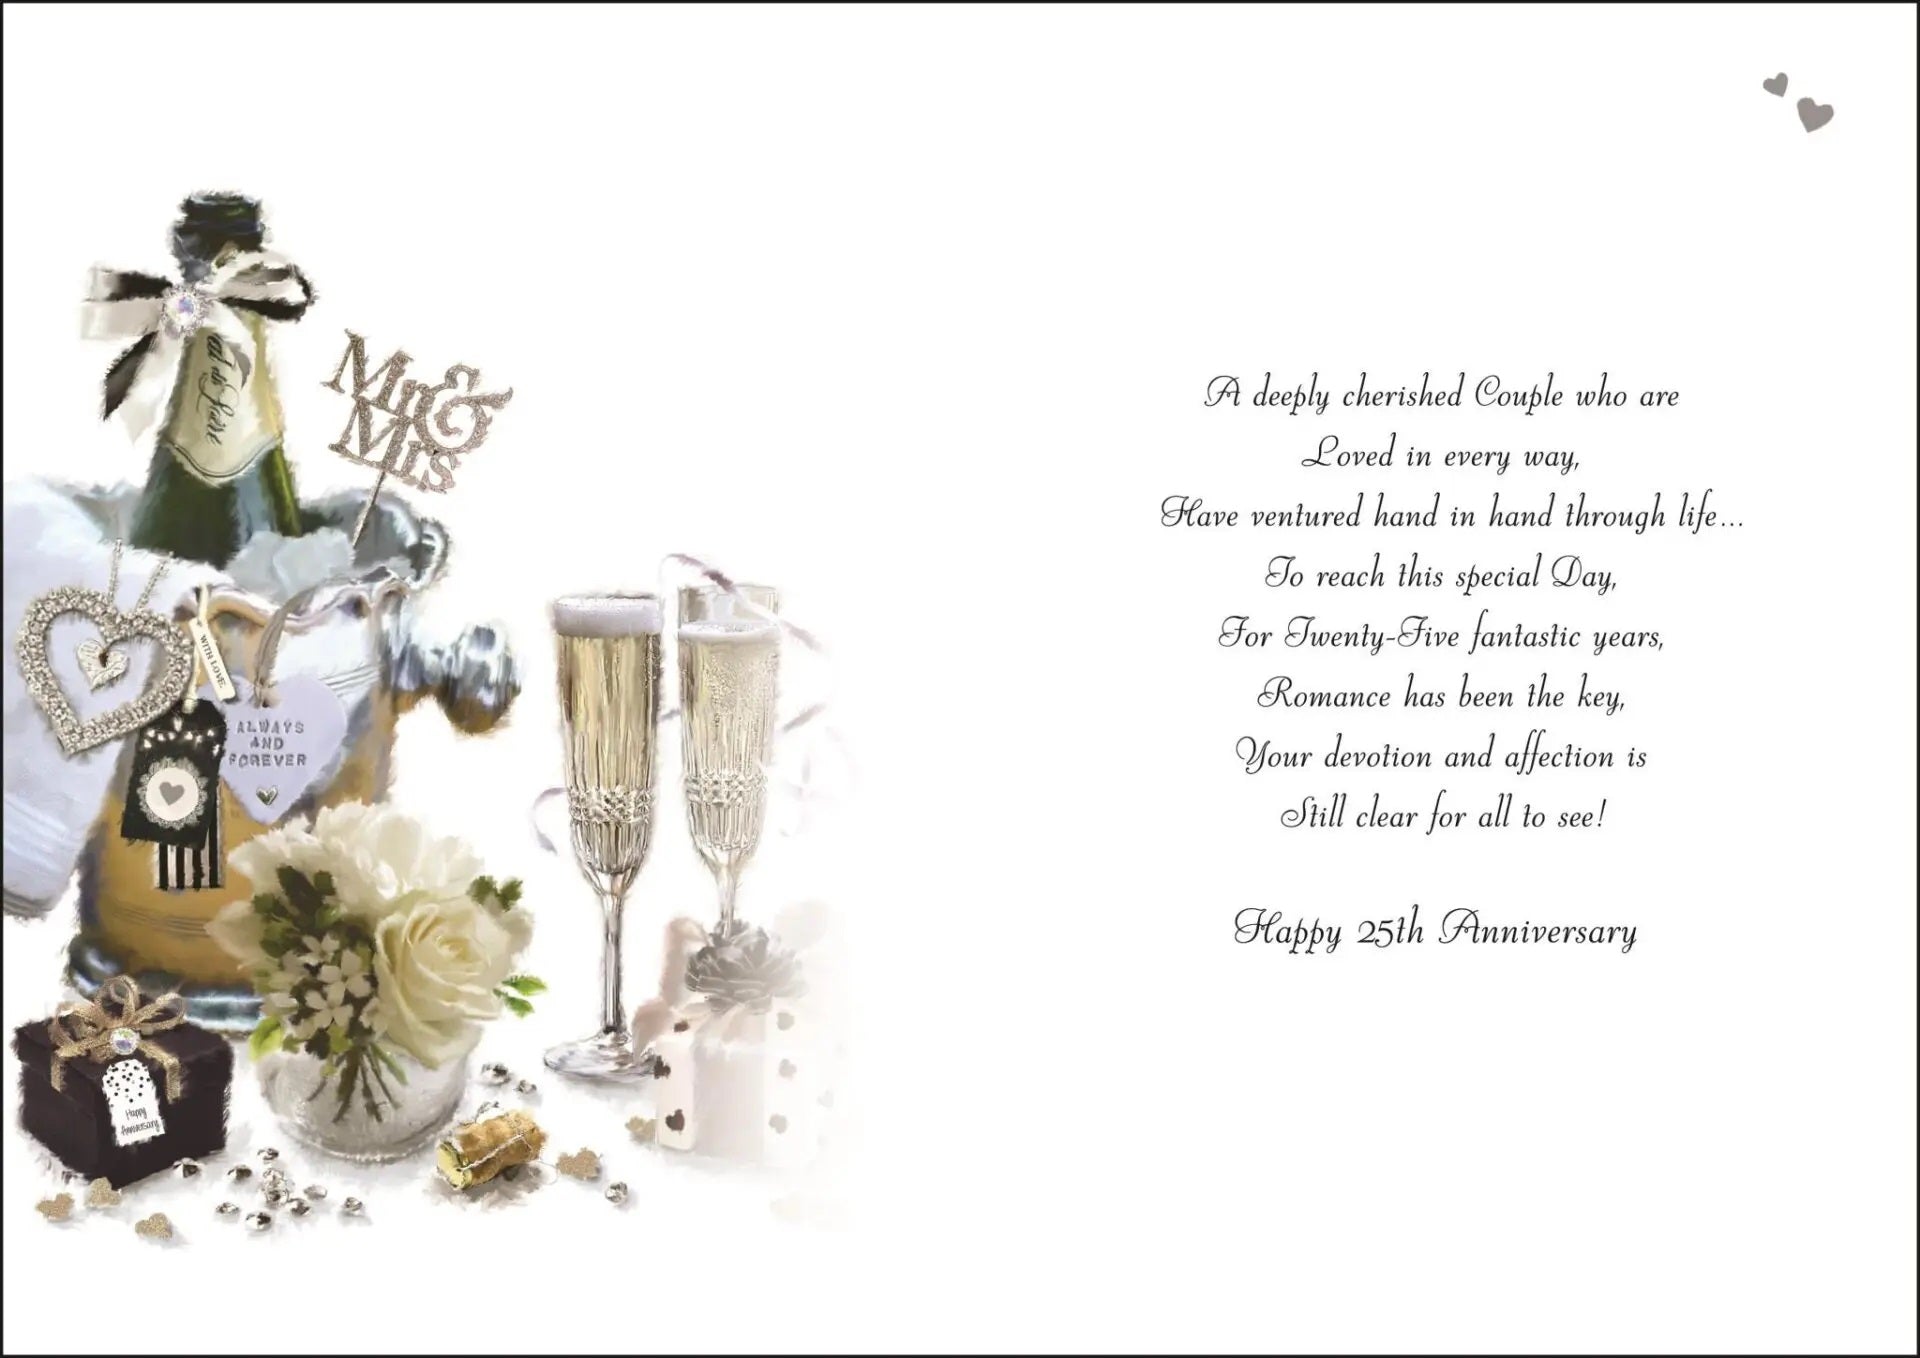 Son & Daughter-In-Law 25th Anniversary Card - Champagne, Gifts, And Flowers